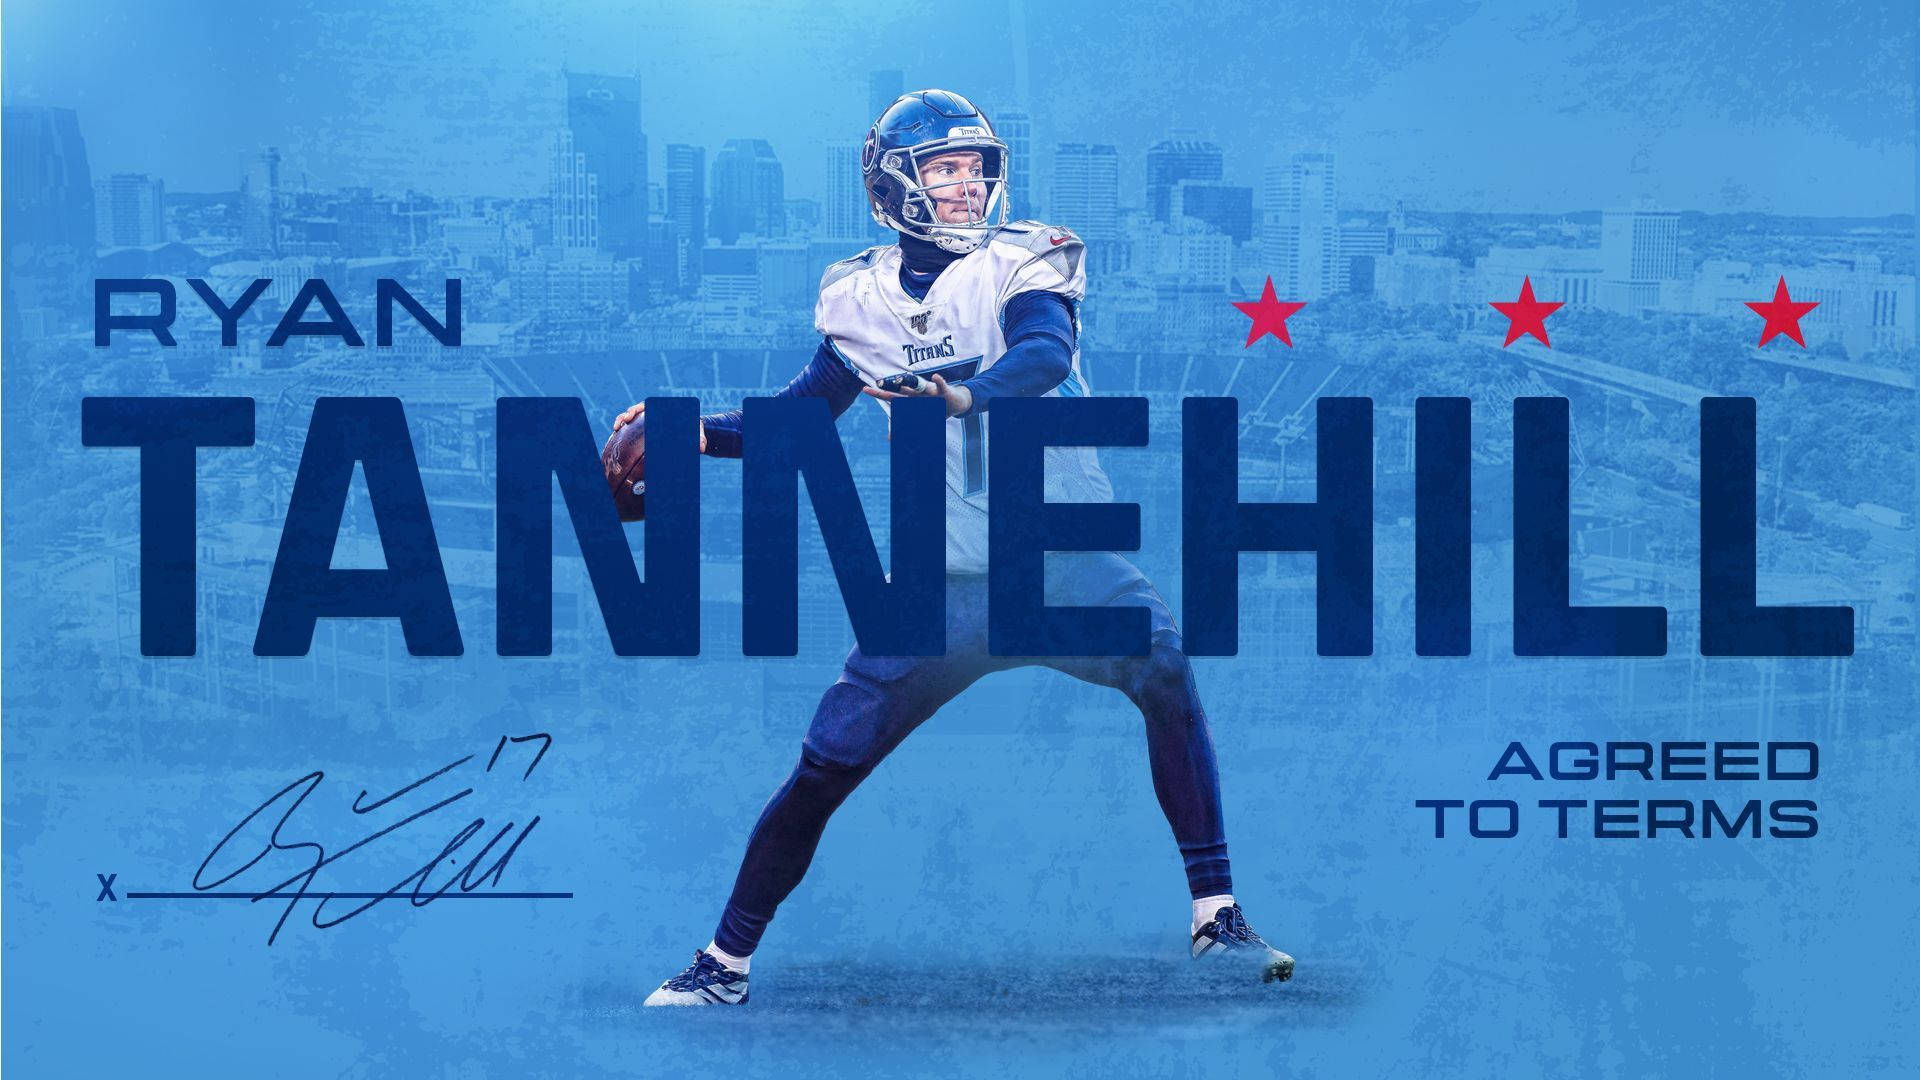 Tennessee Titans Ryan Tannehill Agreed To Terms Wallpaper